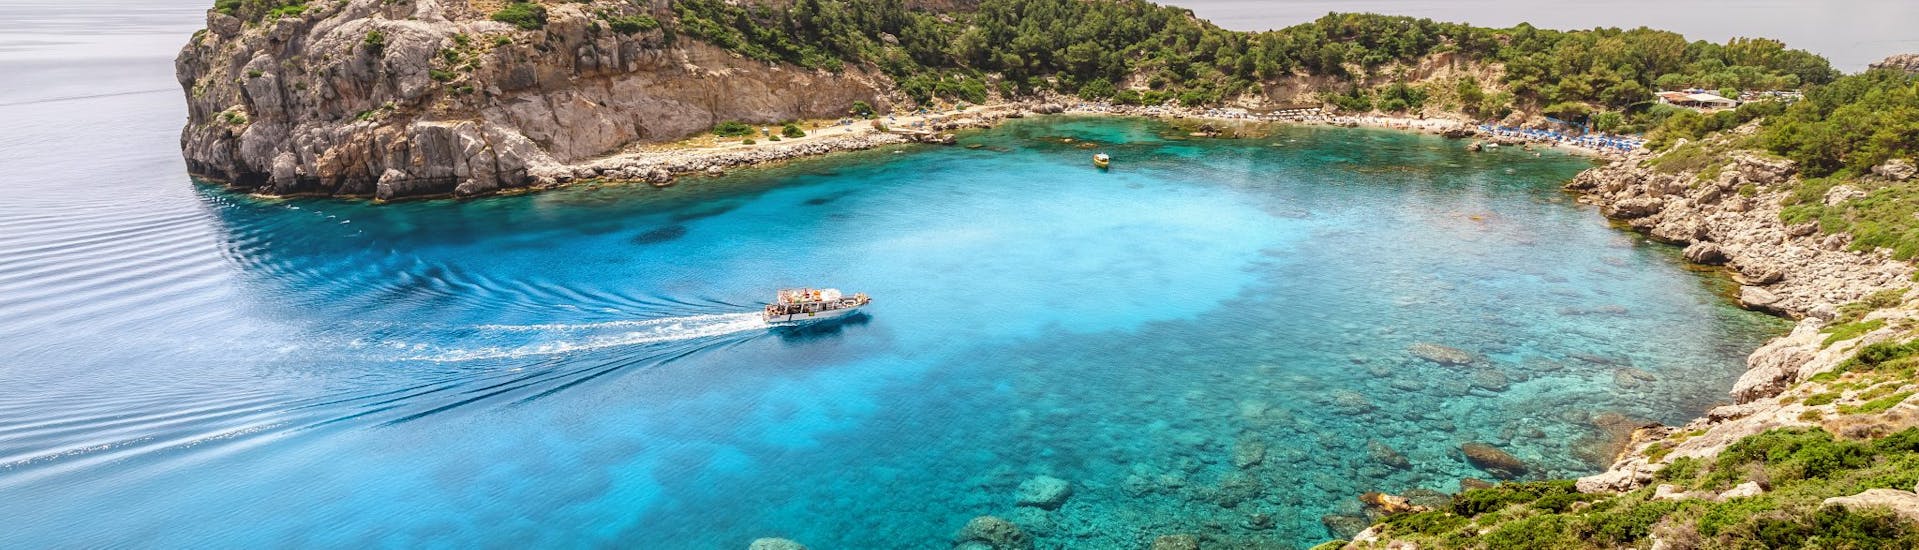 The boat is in the middle of Anthony Quinn Bay, one of the stops during the Boat Trip to Antony Quinn Bay, Traganou Caves & Kallithea with Snorkeling with Rizos Cruises Rhodes.